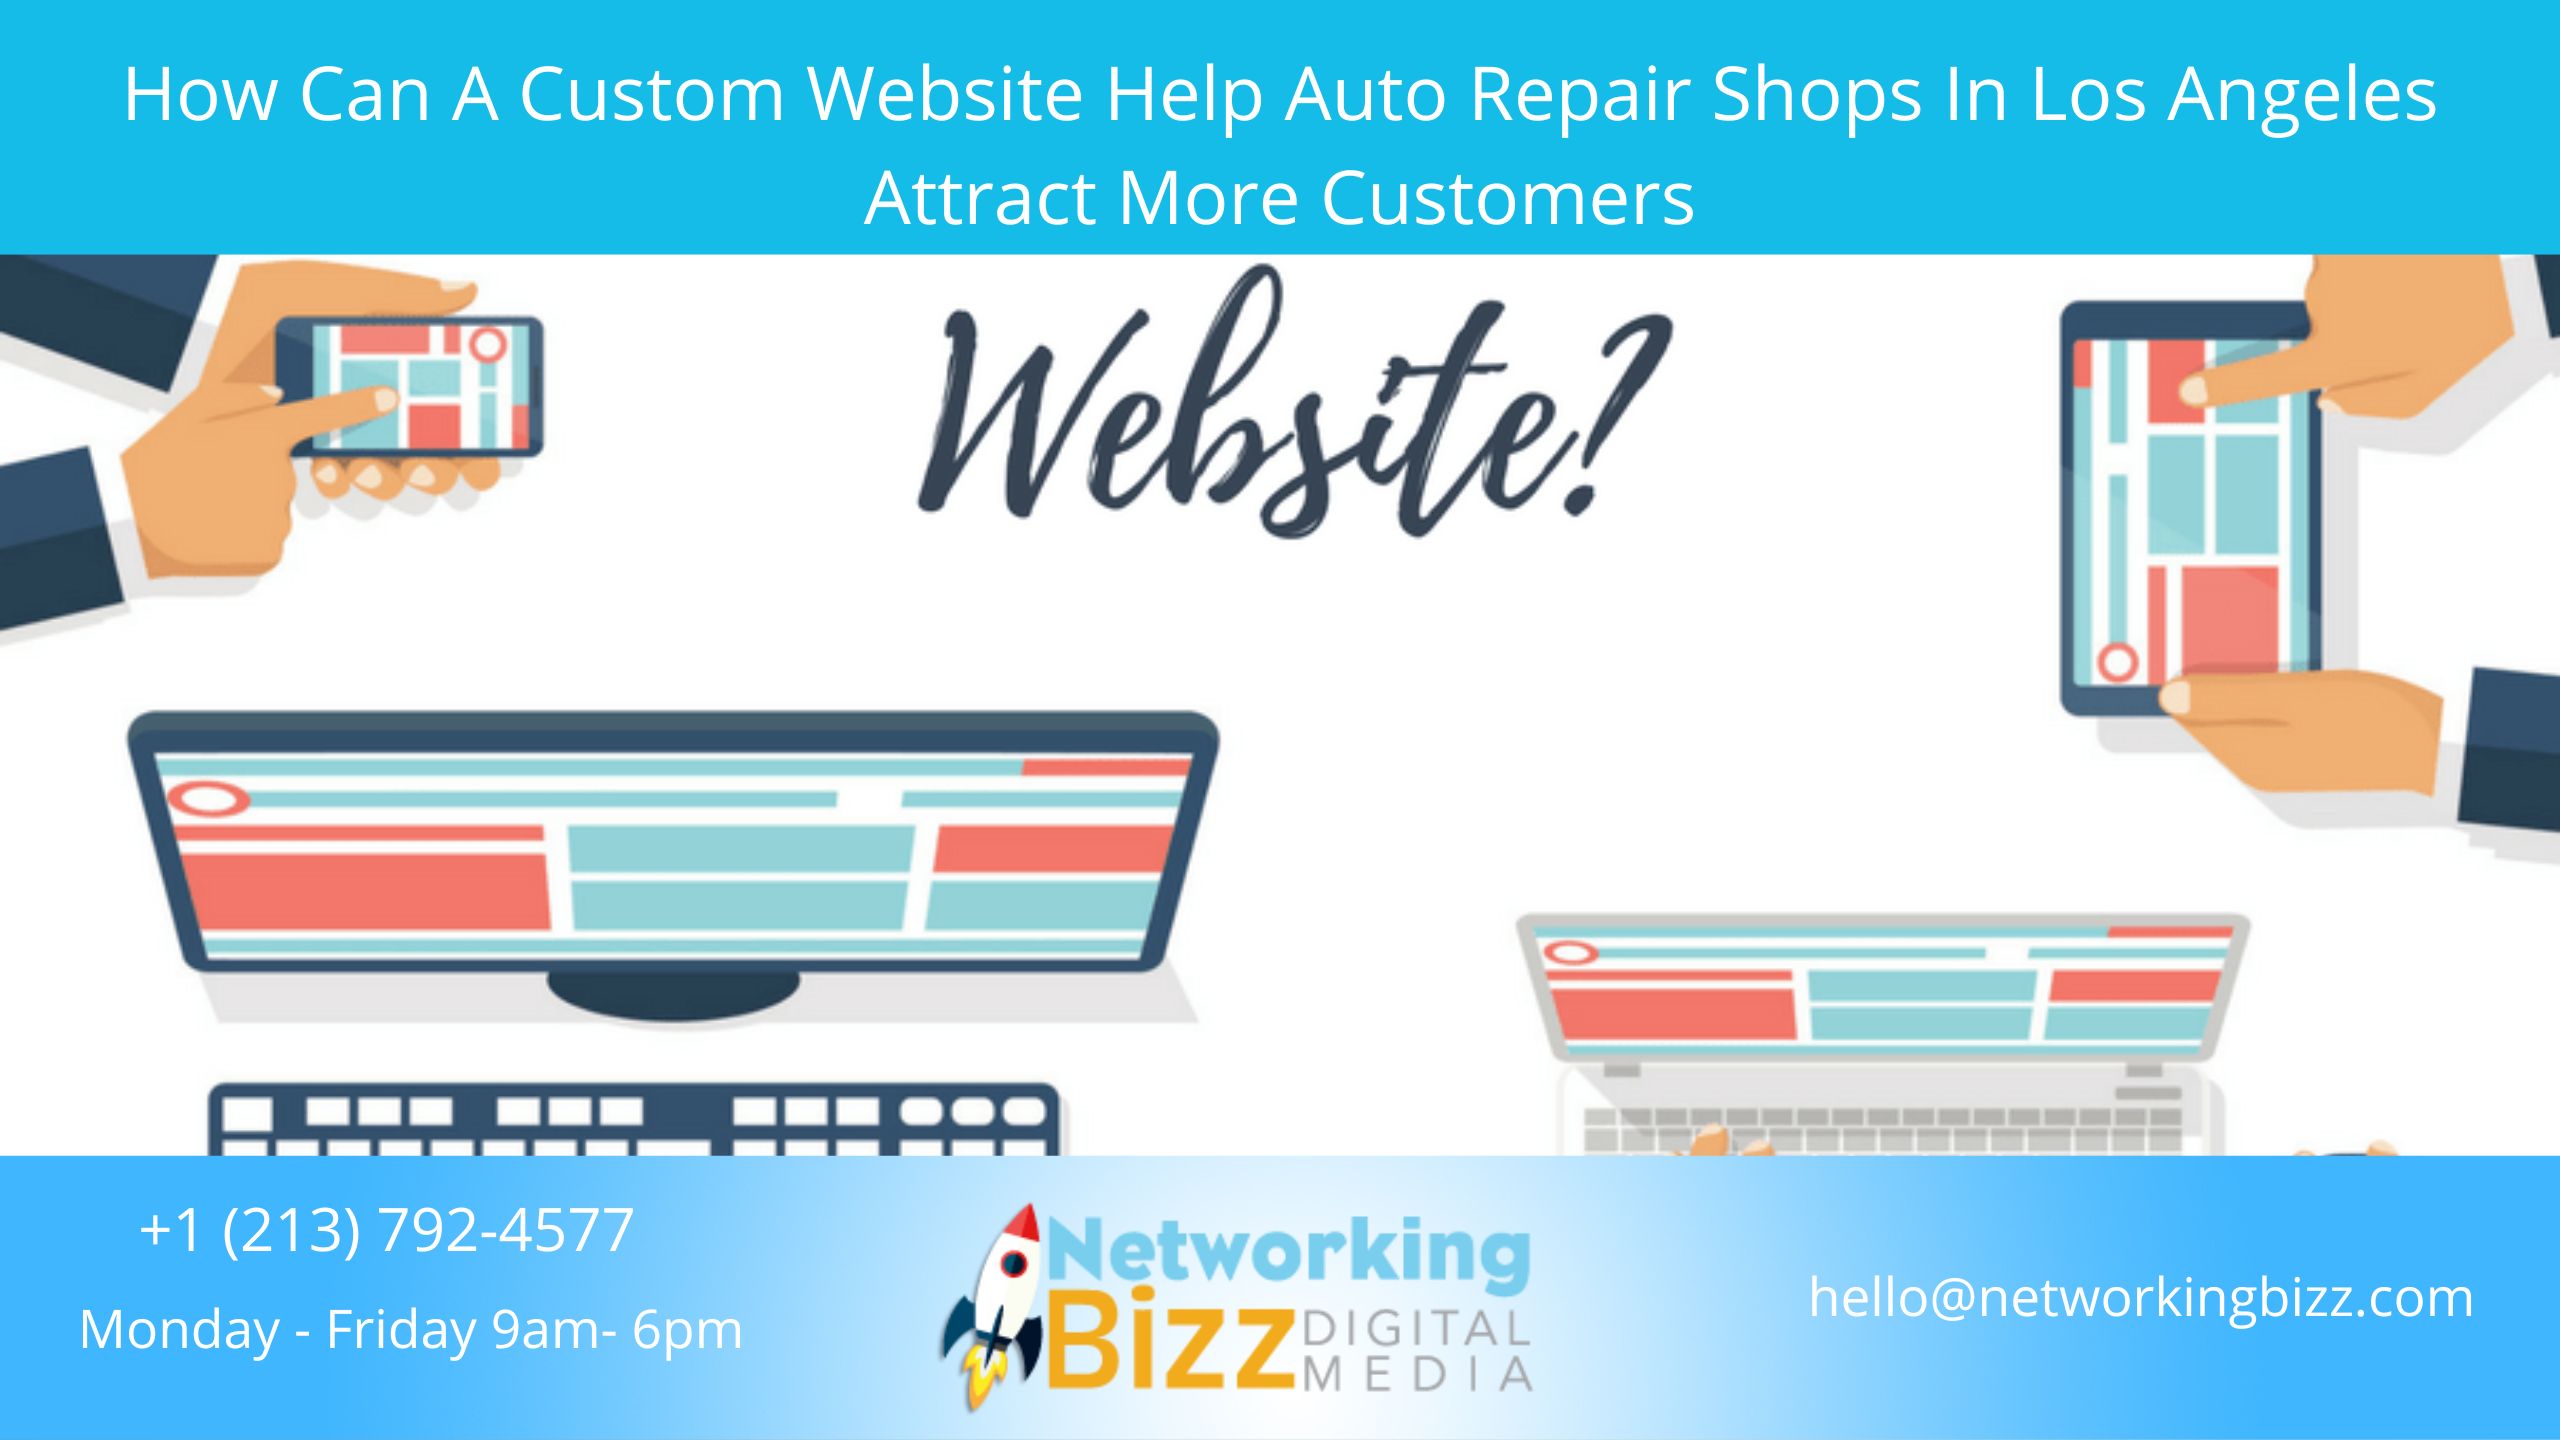 How Can A Custom Website Help Auto Repair Shops In Los Angeles Attract More Customers